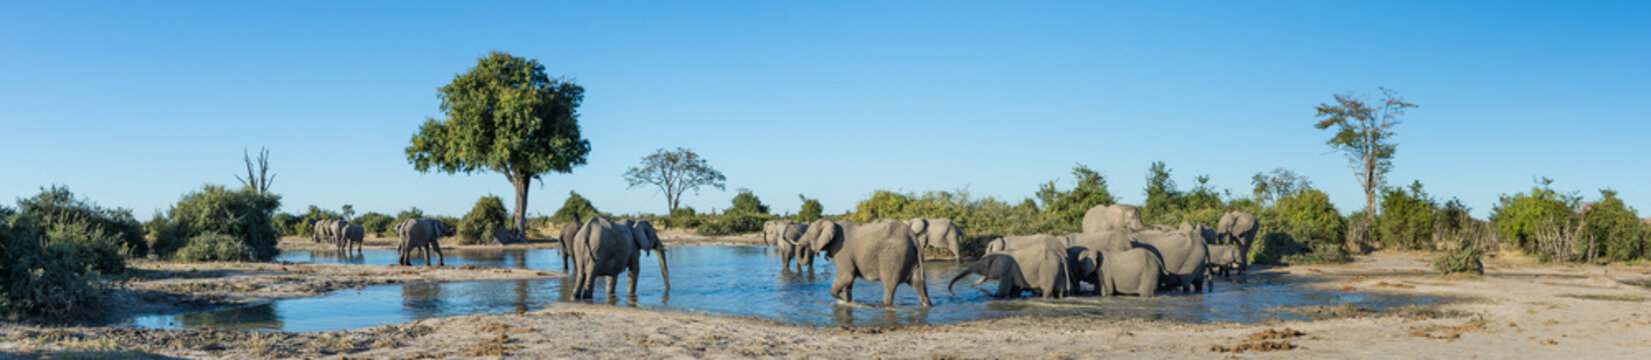 A colour, panorama image of a herd of elephants, Loxodonta africana, bathing and drinking at a dwindling waterhole in Savute, Botswana.